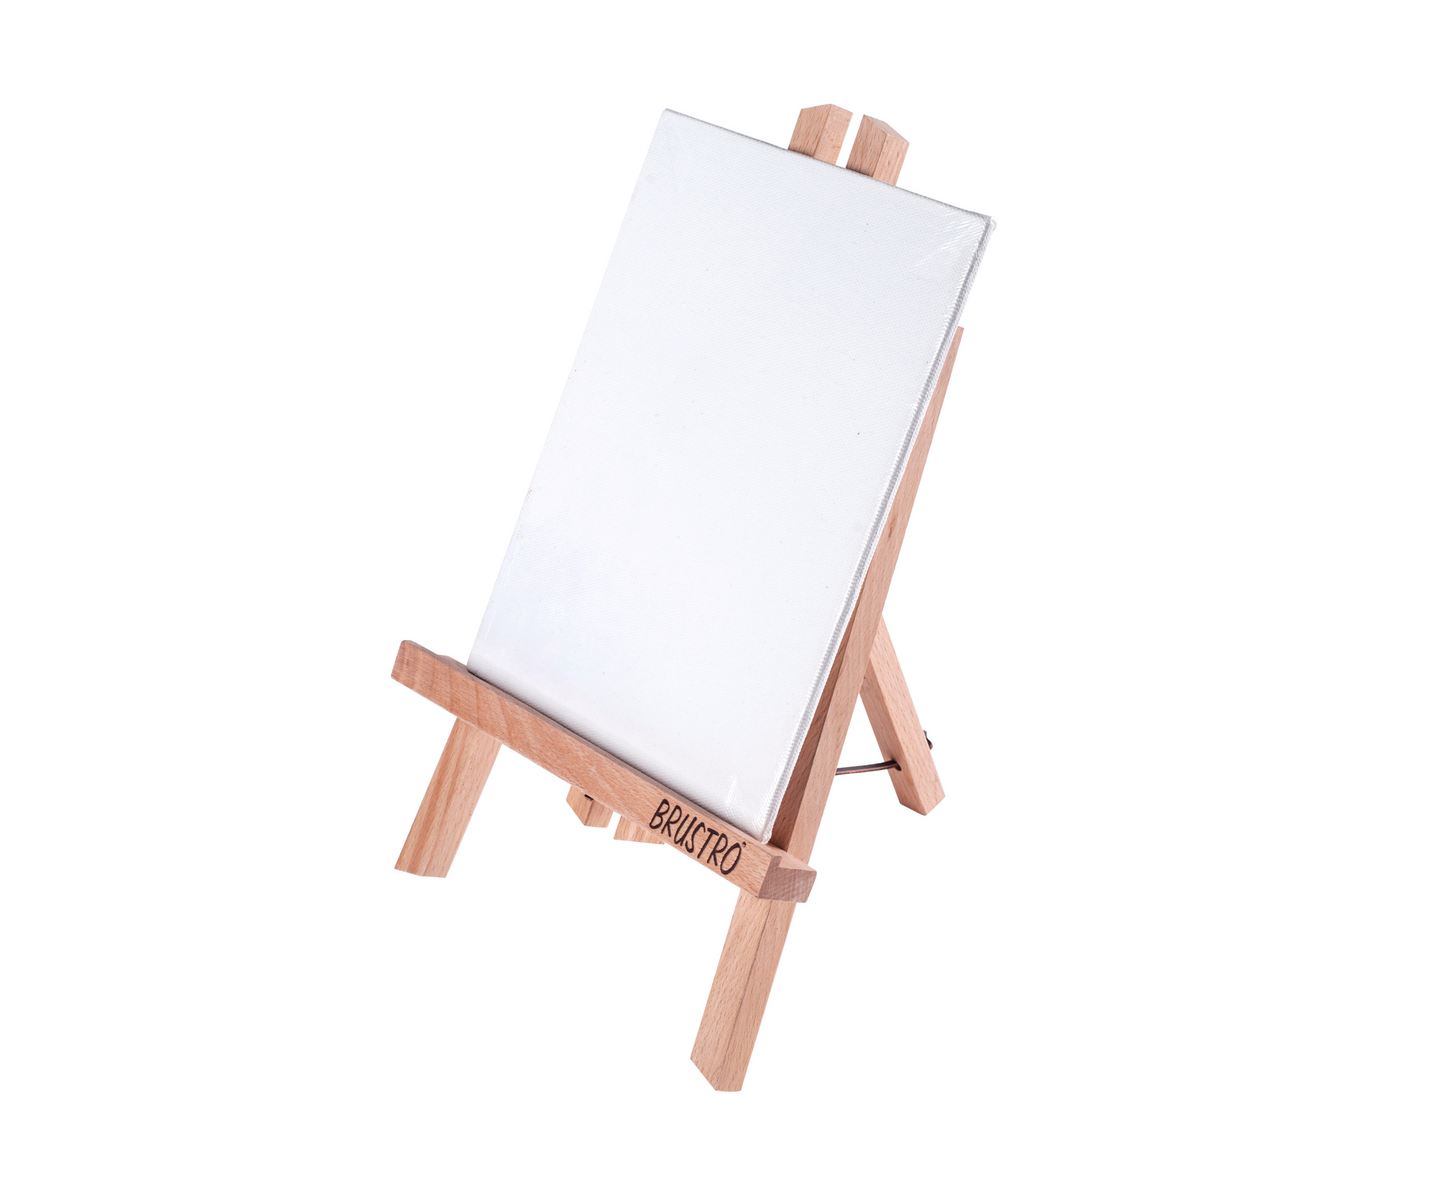 Brustro Artists' Tabletop A-Frame Wooden Easel 12inch